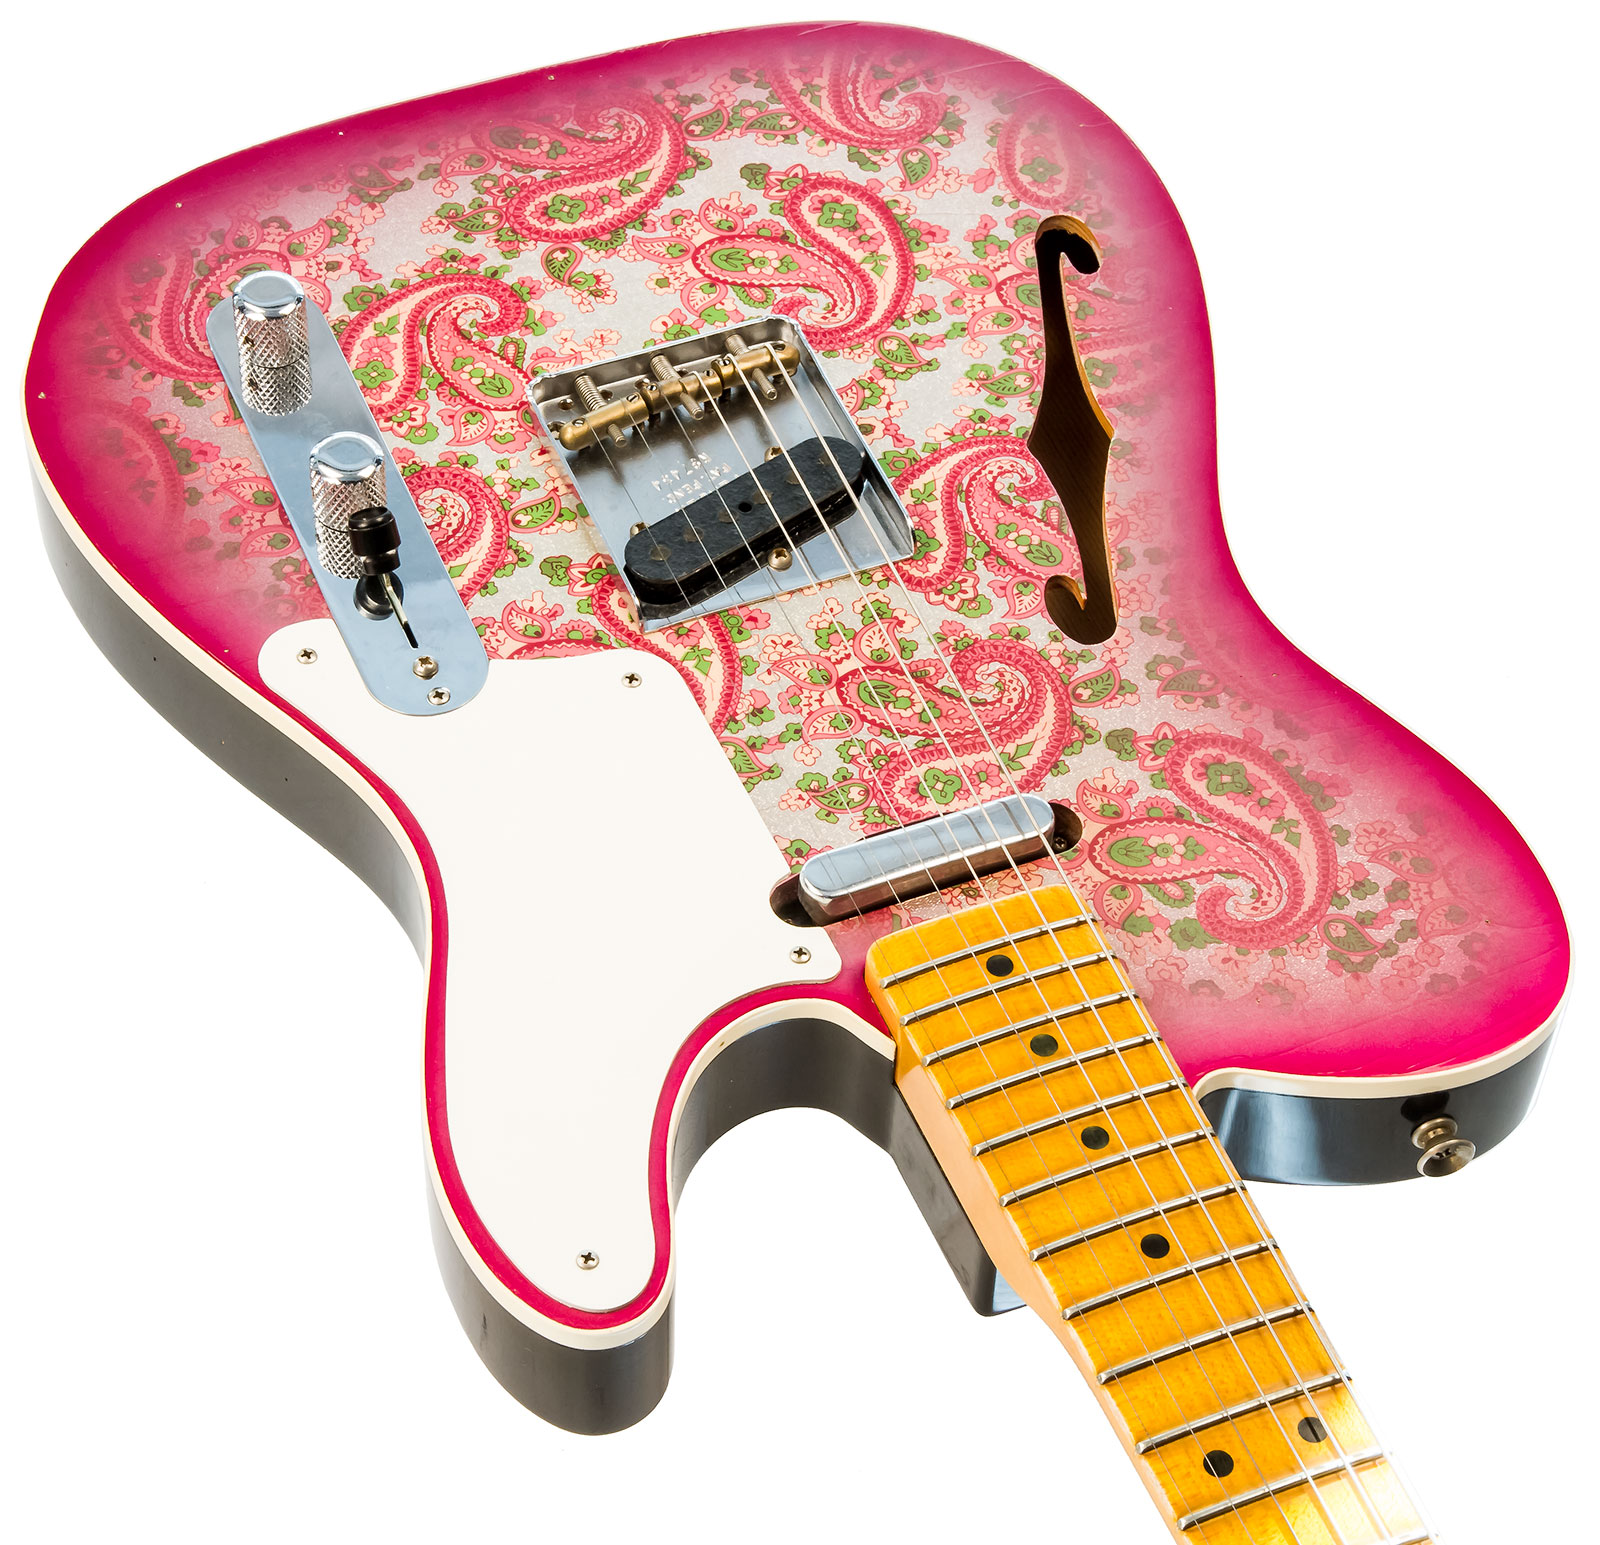 Fender Custom Shop Double Esquire/tele Custom 2s Ht Mn #r97434 - Journeyman Relic Aged Pink Paisley - Semi-hollow electric guitar - Variation 3